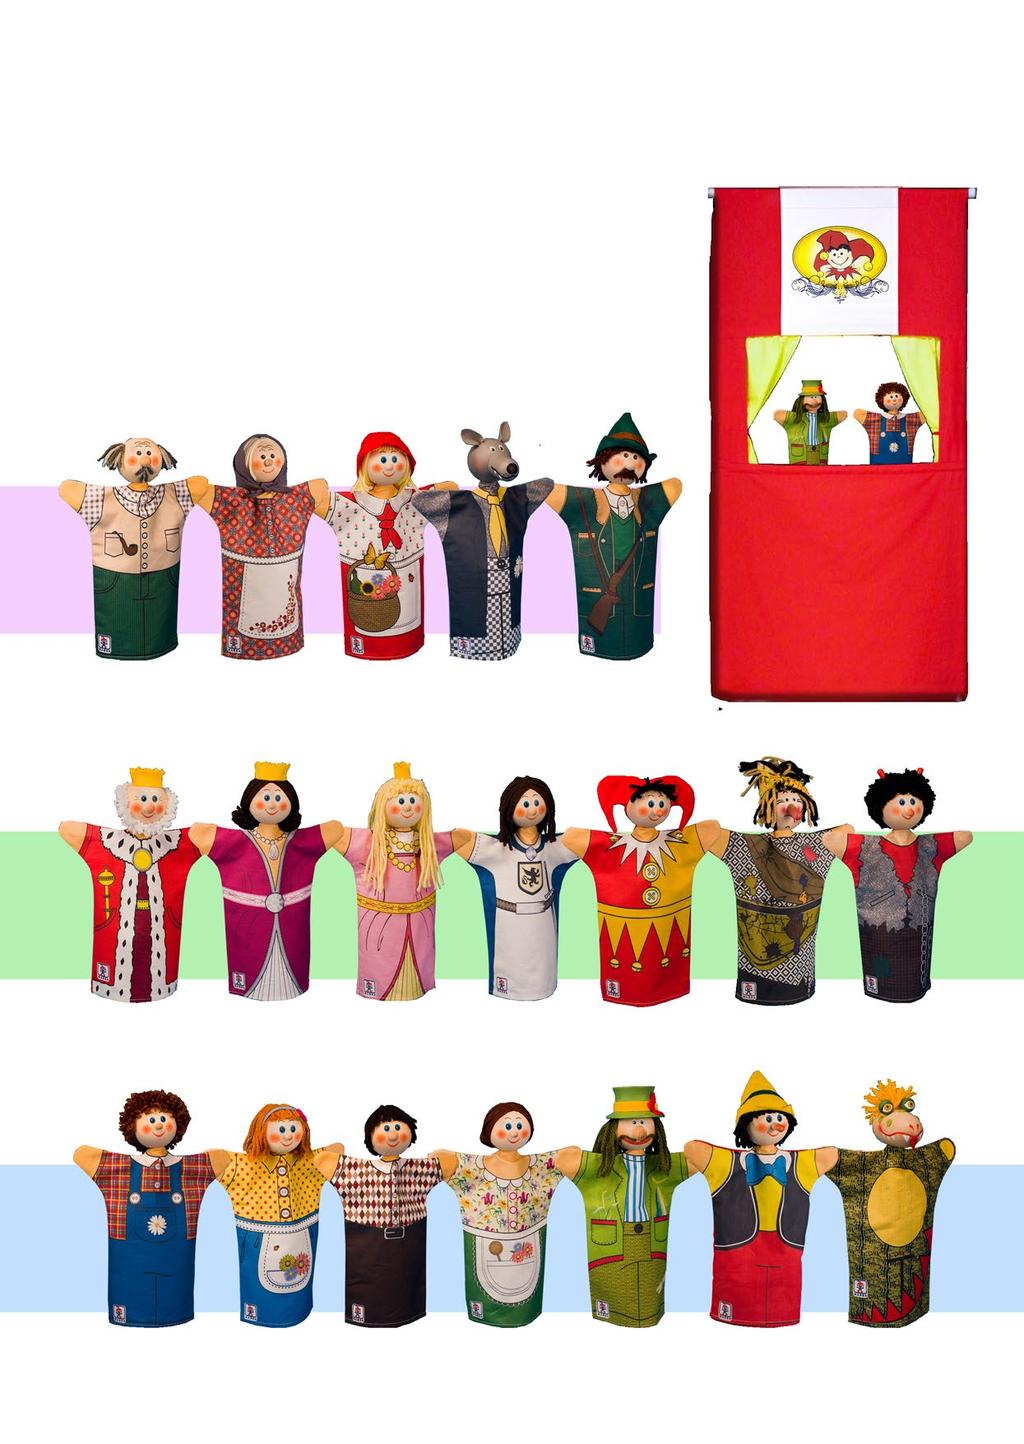 CHILD HAND S PUPPETS These puppets are with their size designed for children or moms with a tiny hand.